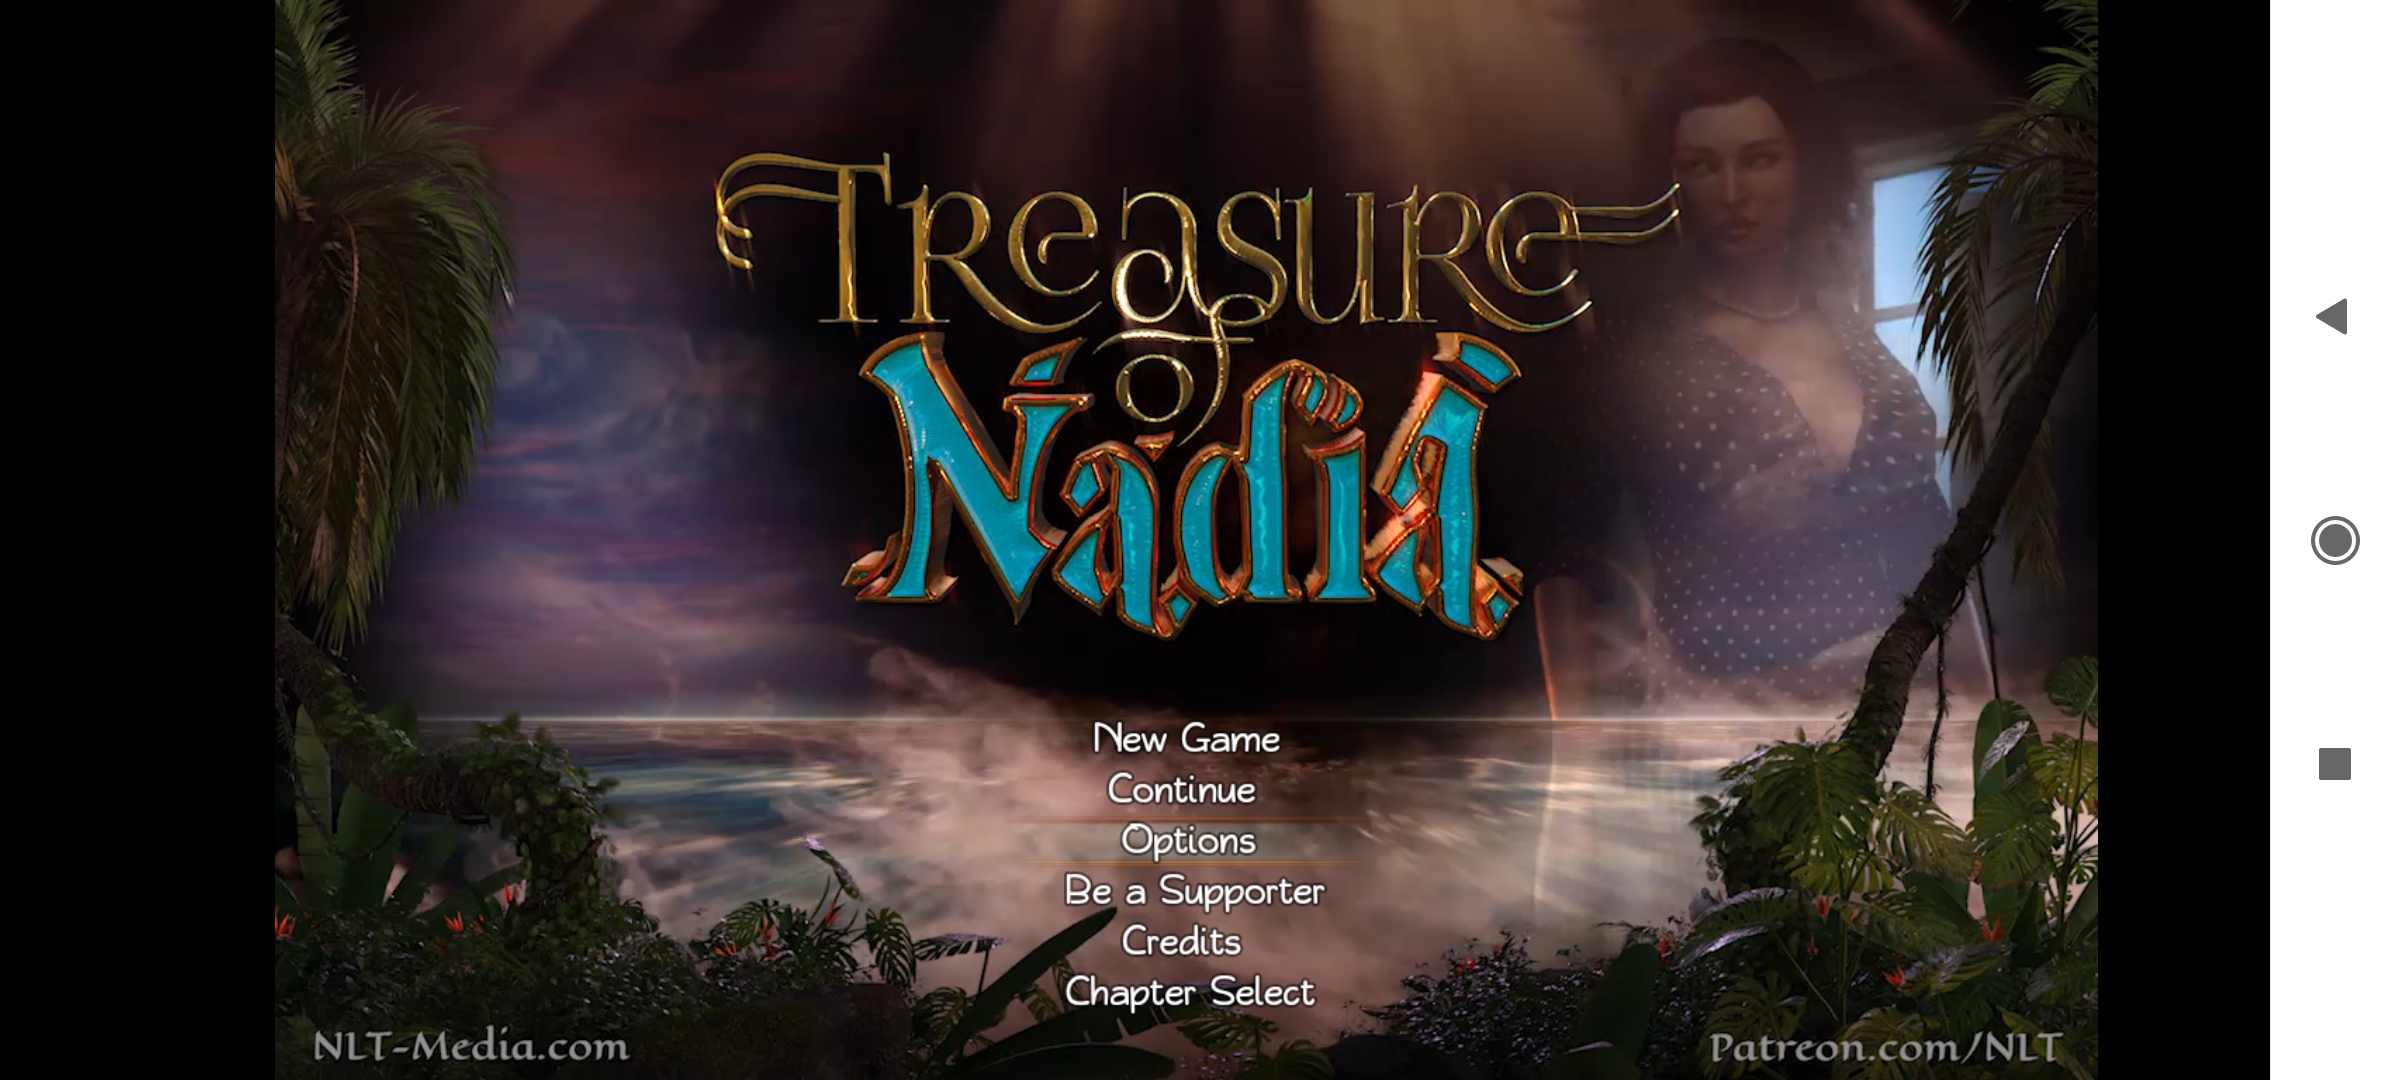 Comments 344 To 305 Of 711 Treasure Of Nadia By Nlt